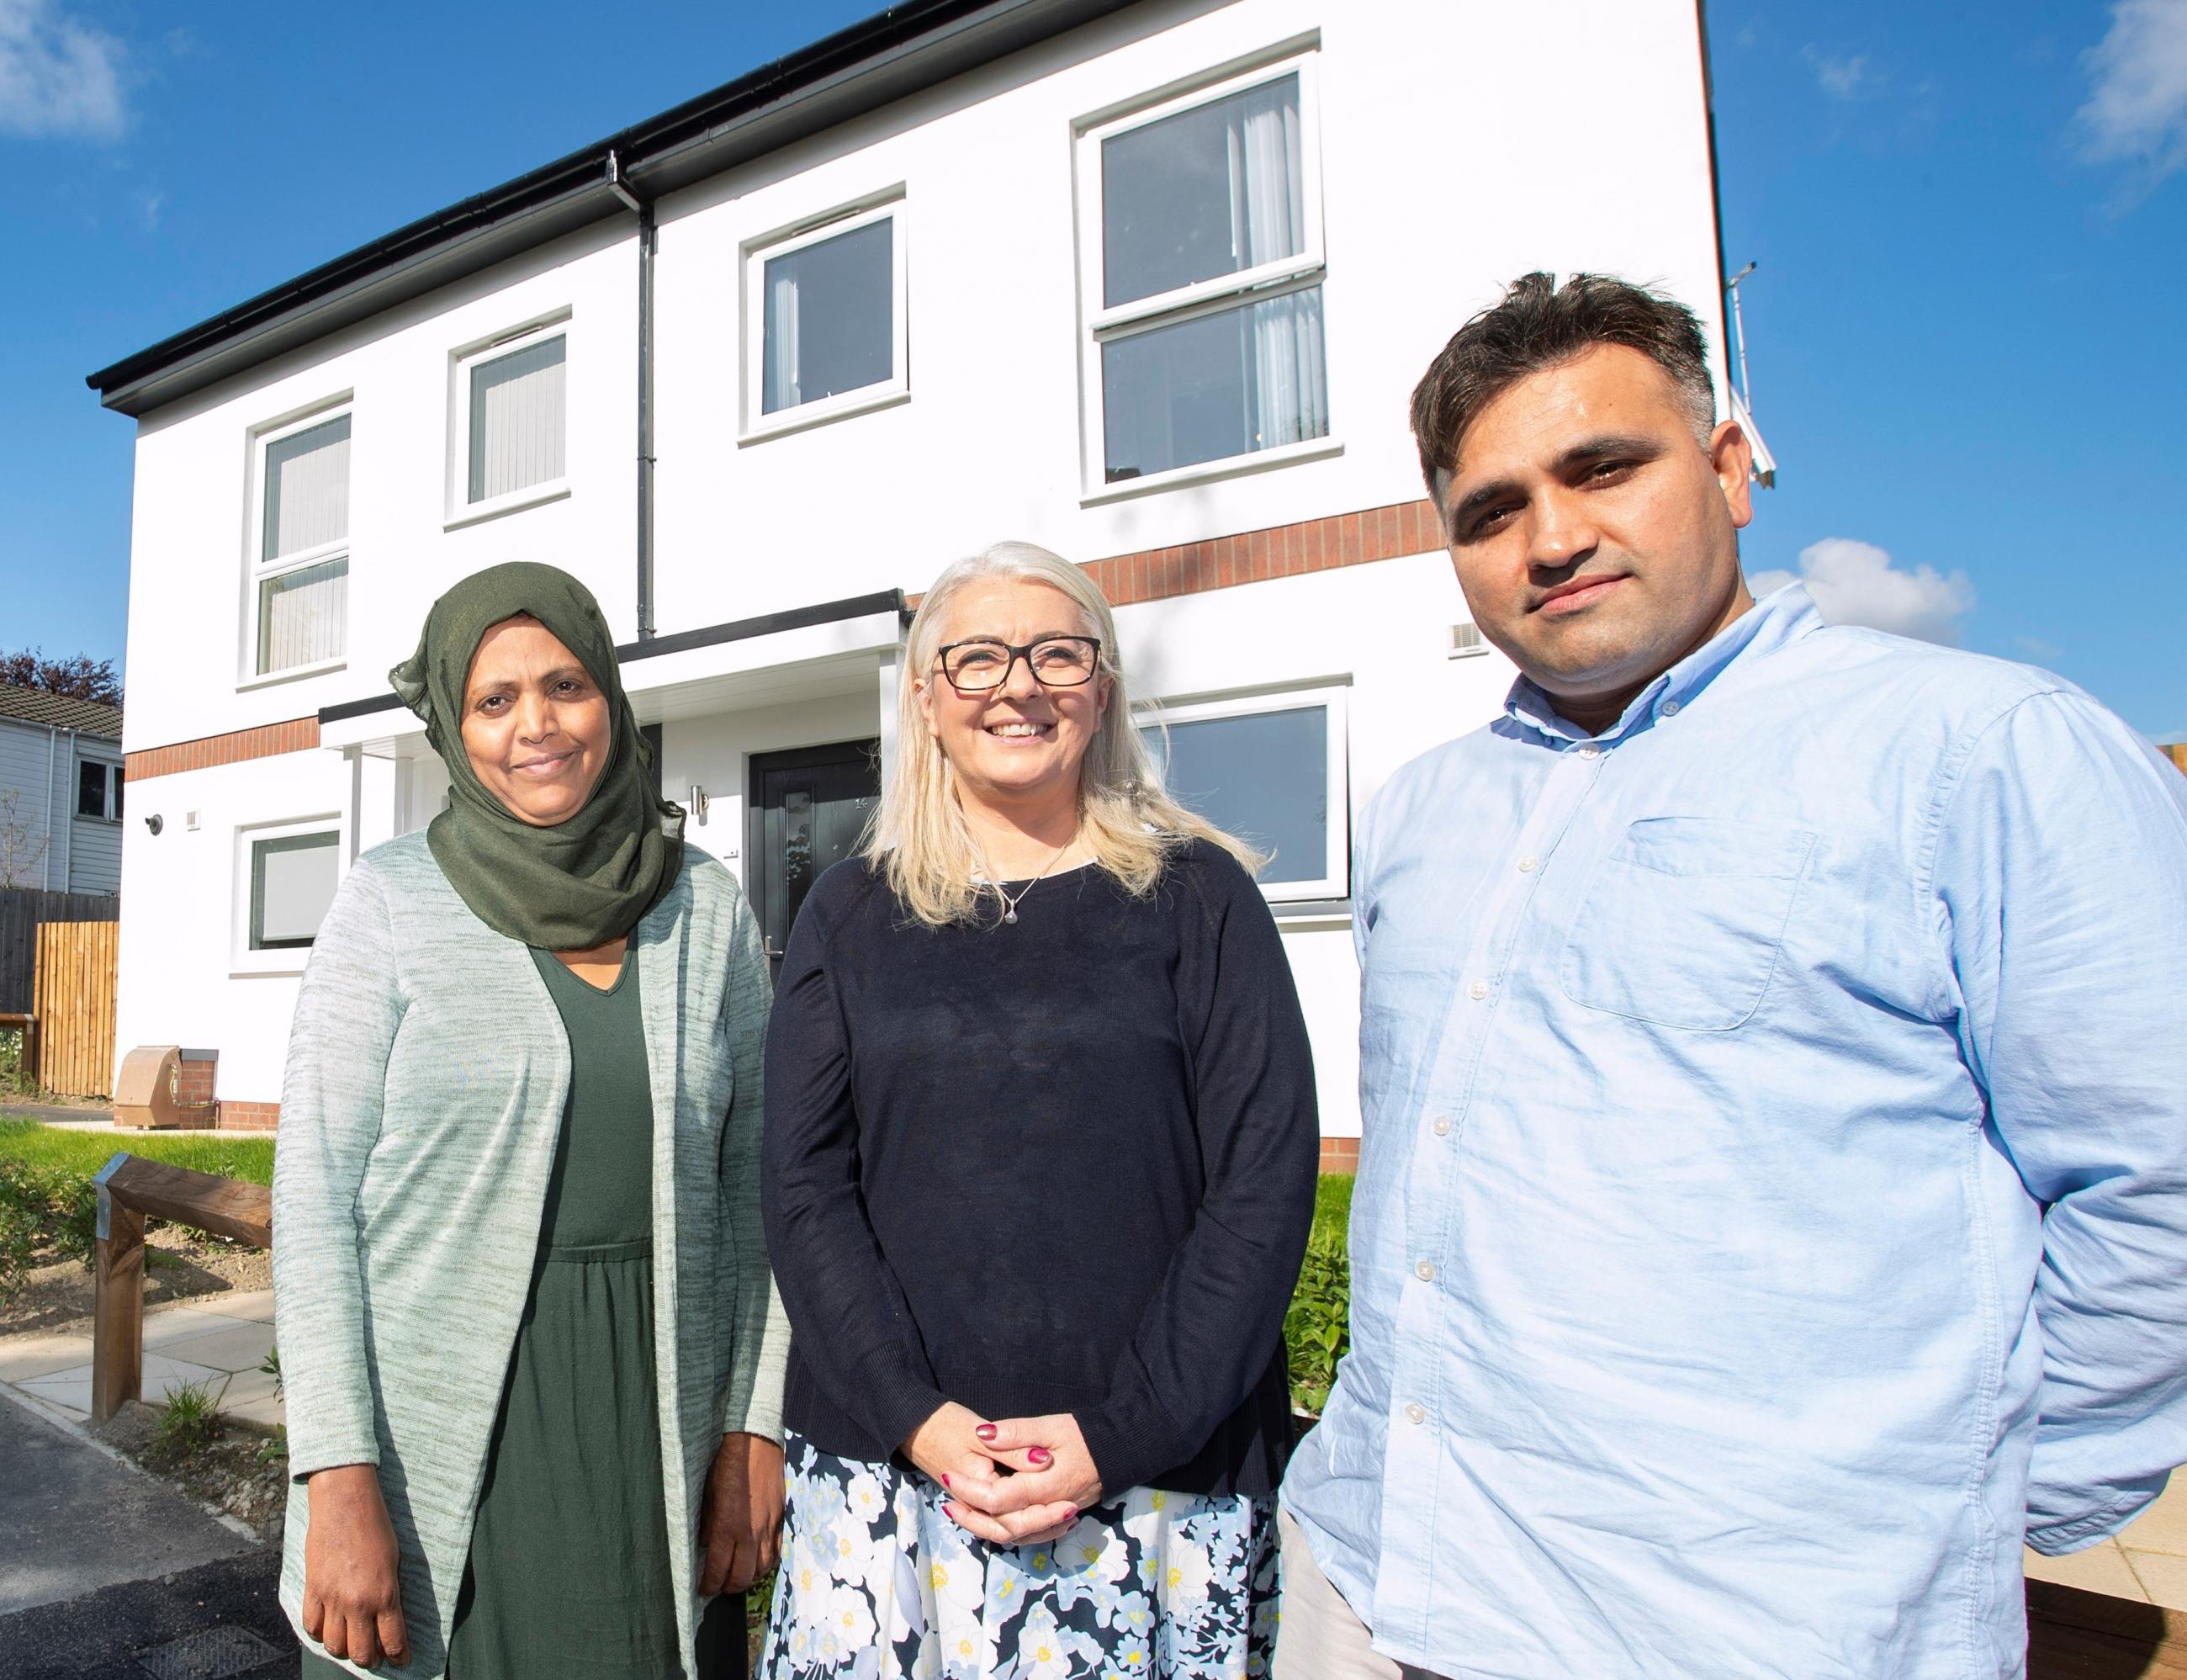 Councillor Linda Hobson welcomes residents to their new homes